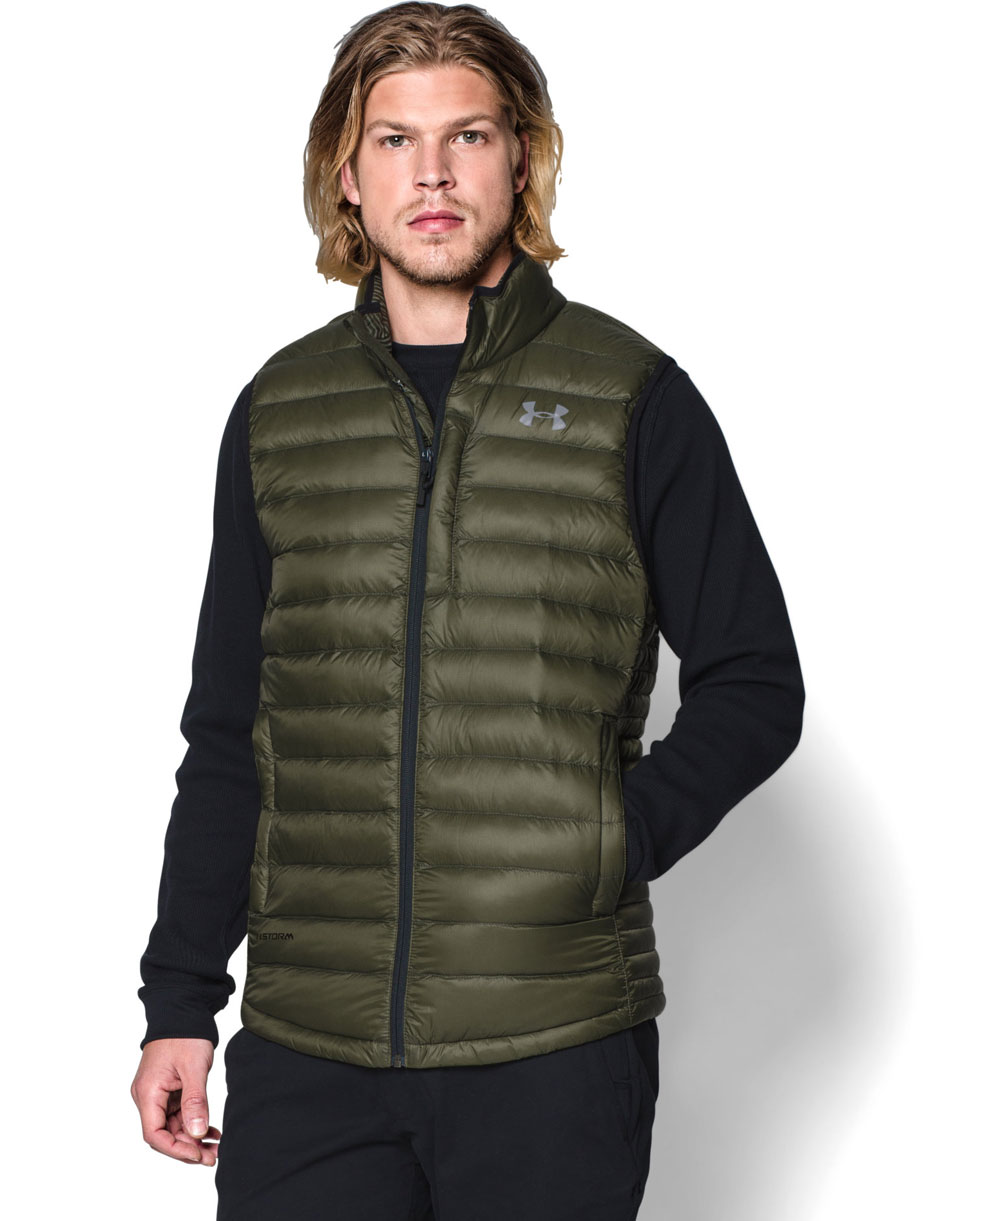 Armour Storm ColdGear Infrared Turing Chaqueta sin Mangas